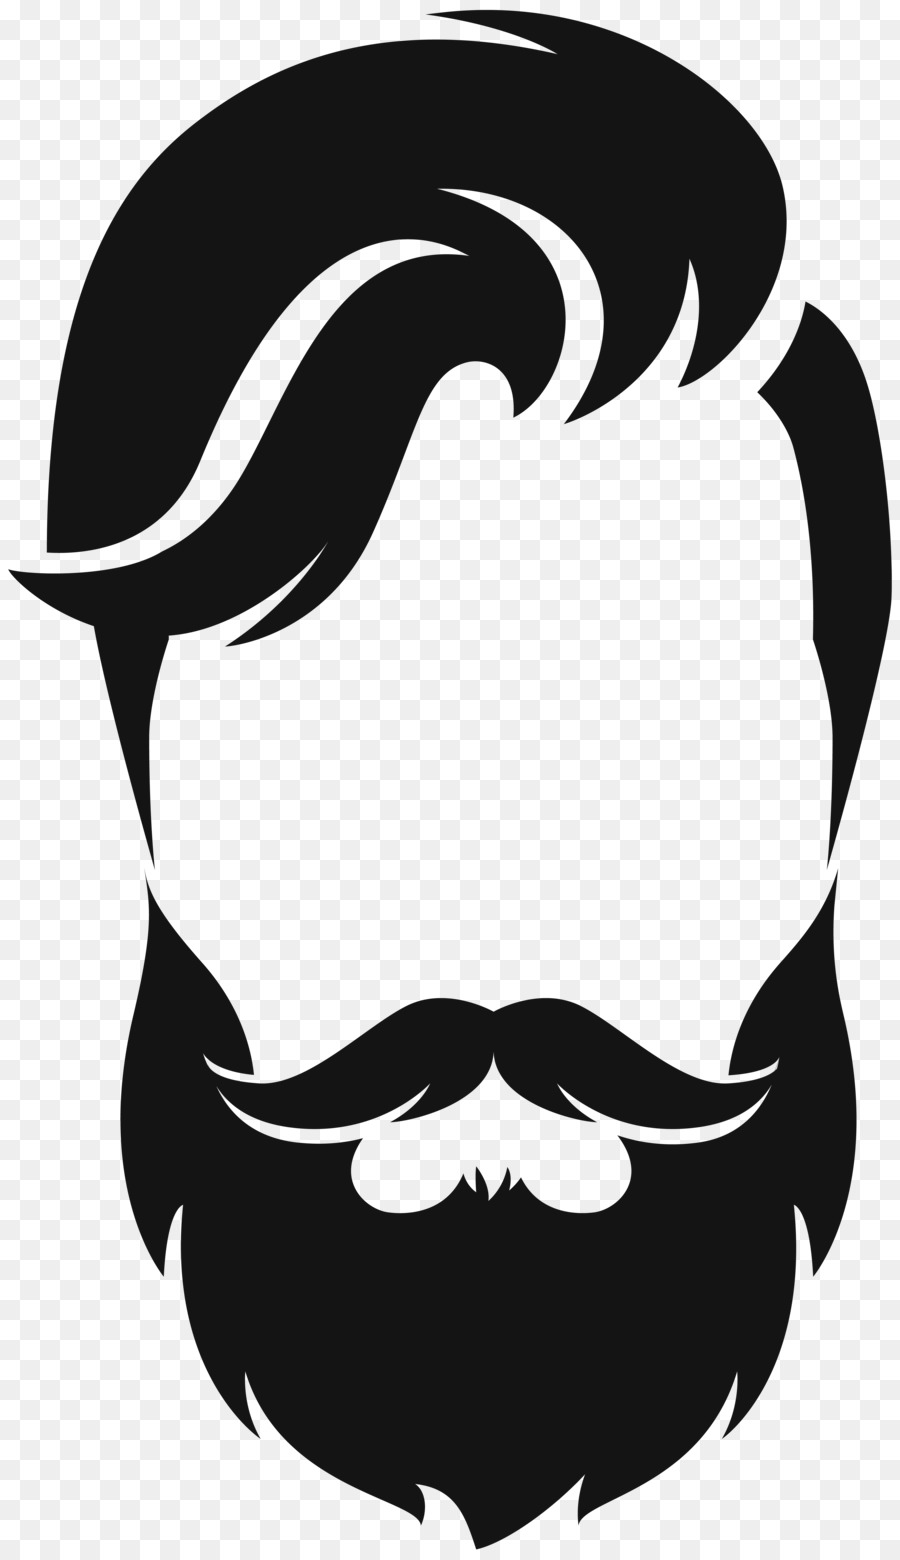 Silhouette Beard Moustache Clip art - hair style png download - 4626*8000 - Free Transparent Silhouette png Download.